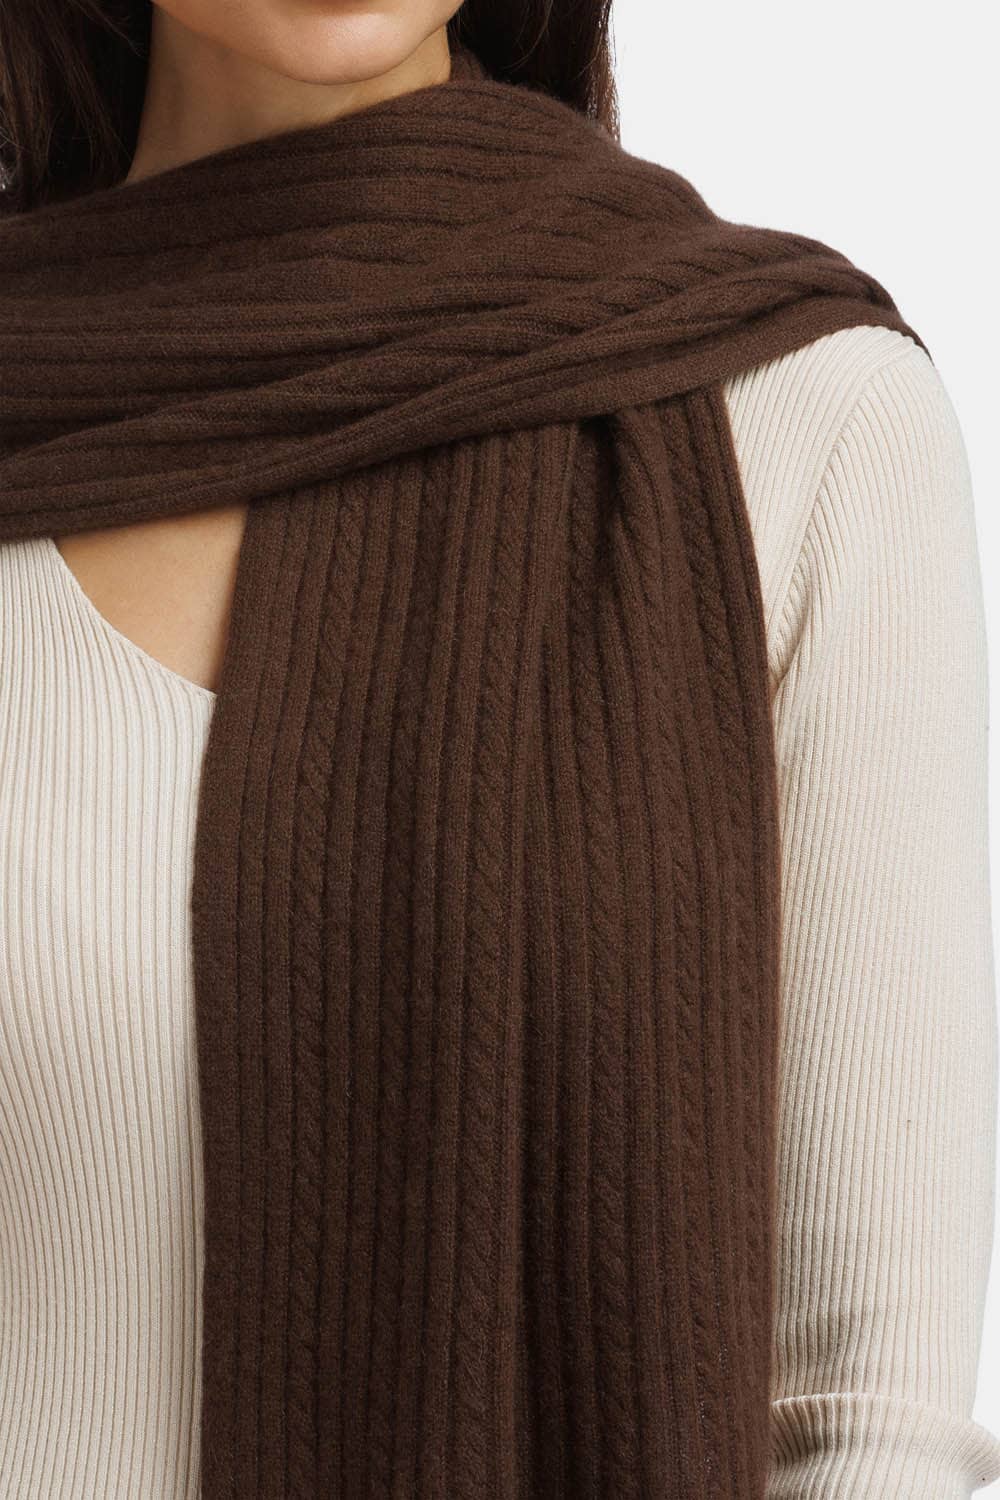 Women's 100% Cashmere Cable Knit Scarf with Gift Box Womens>Accessories>Scarf Fishers Finery Cocoa 